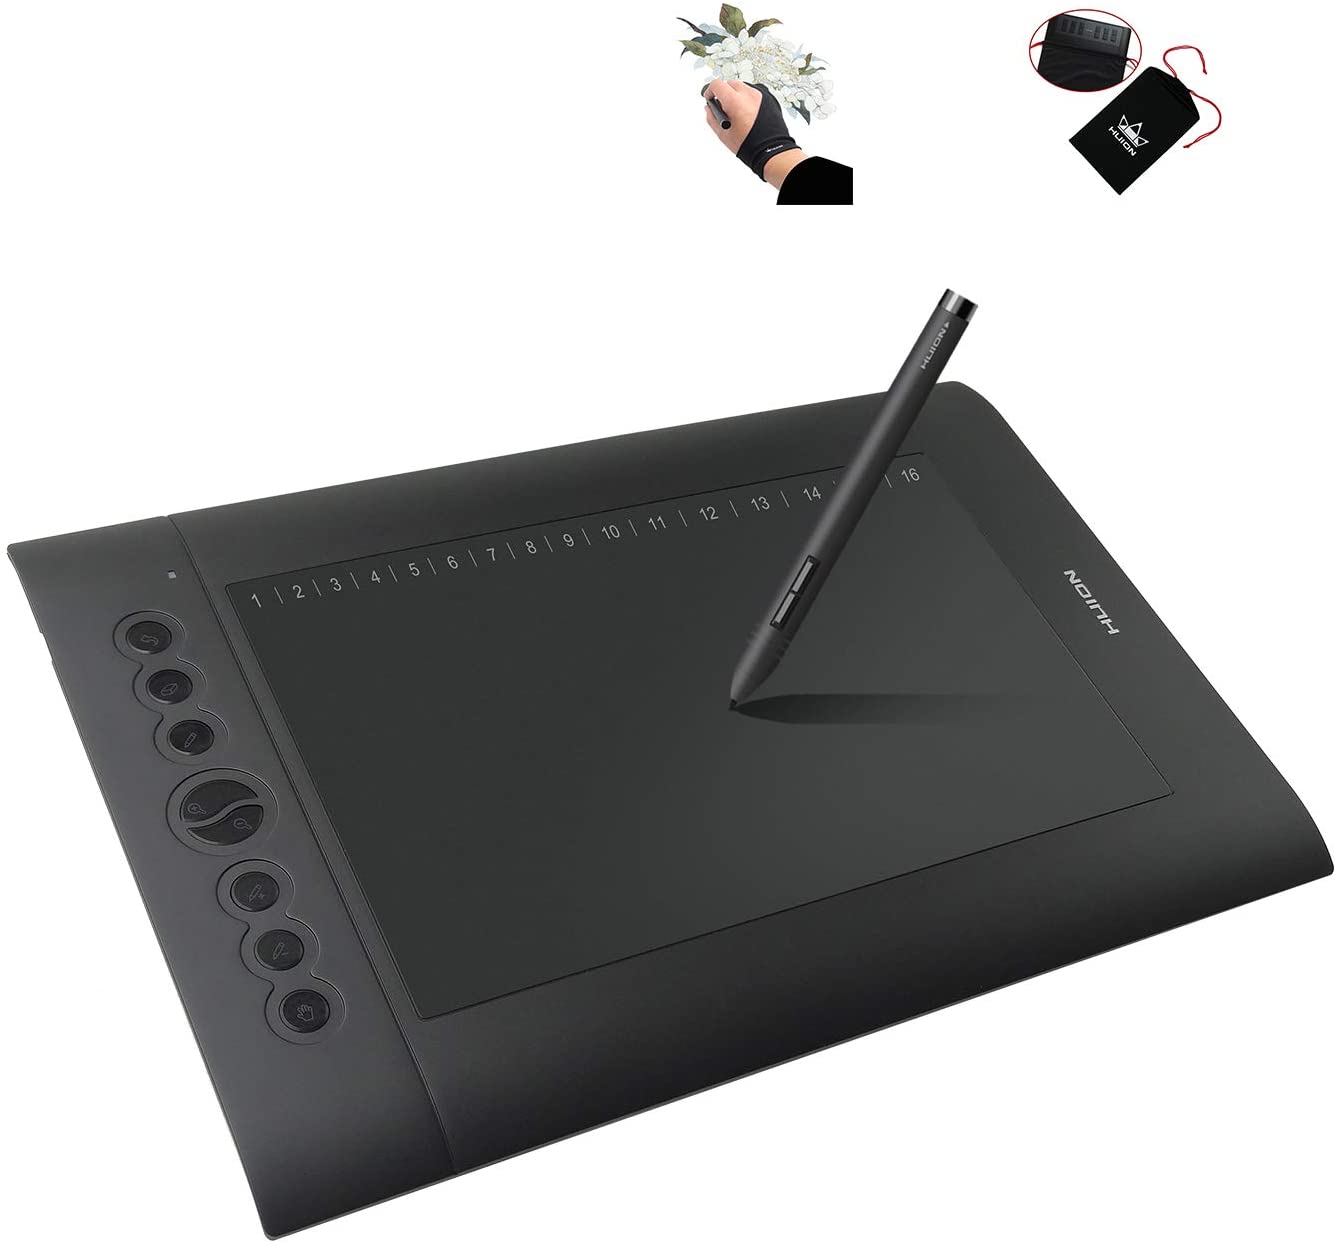 HUION H610 Pro Graphic Drawing Tablet & Glove